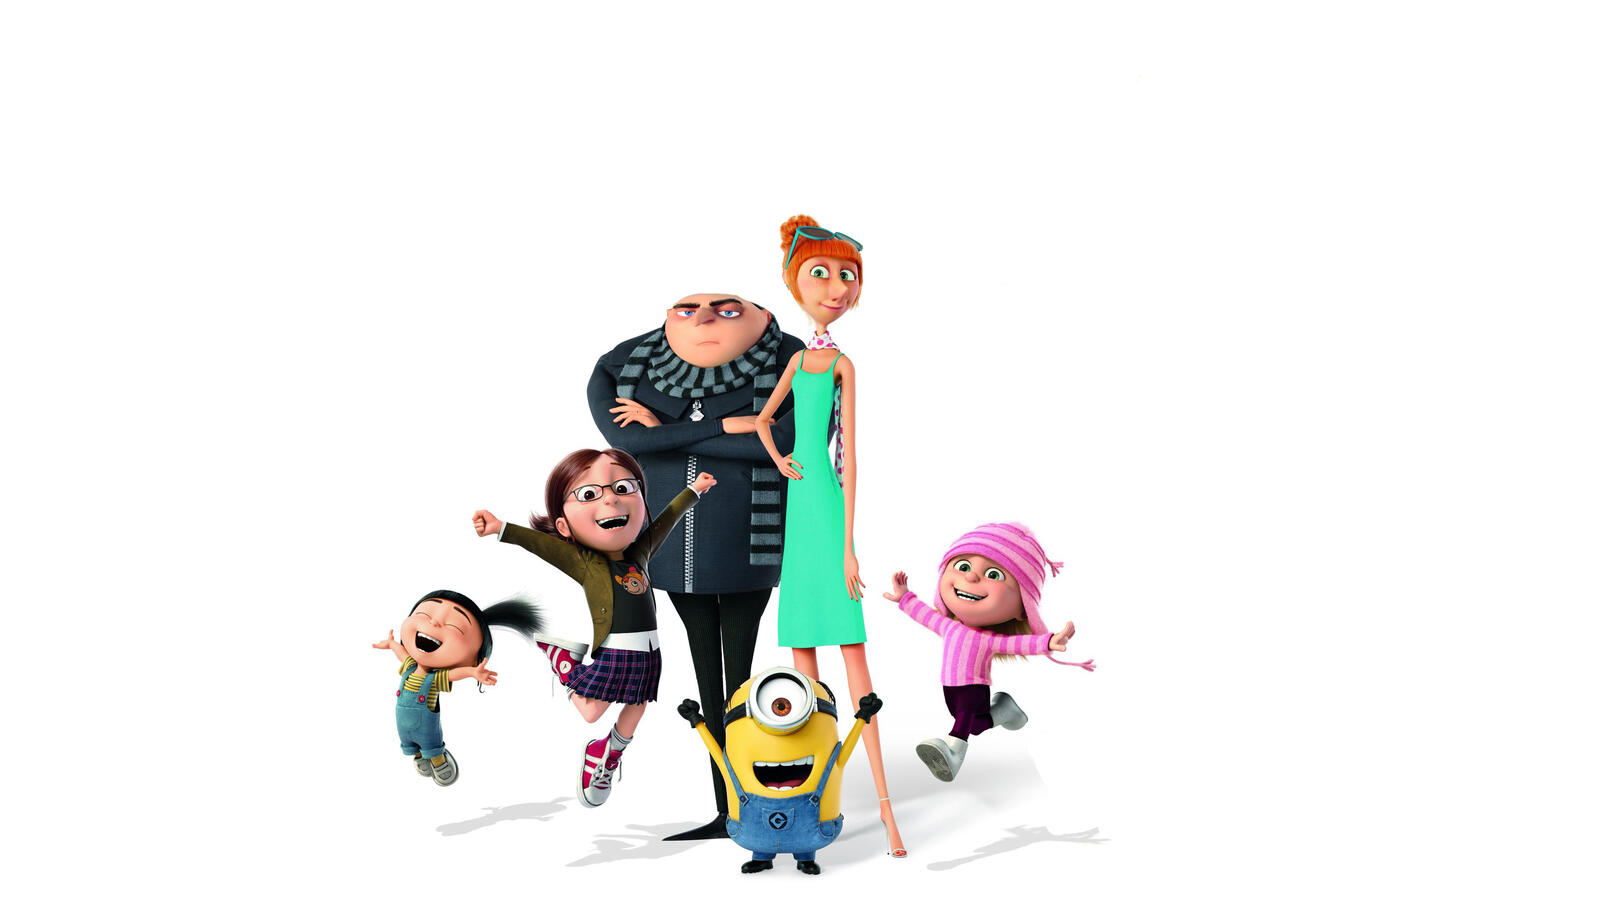 Wallpapers minions 2017 Movies cartoons on the desktop